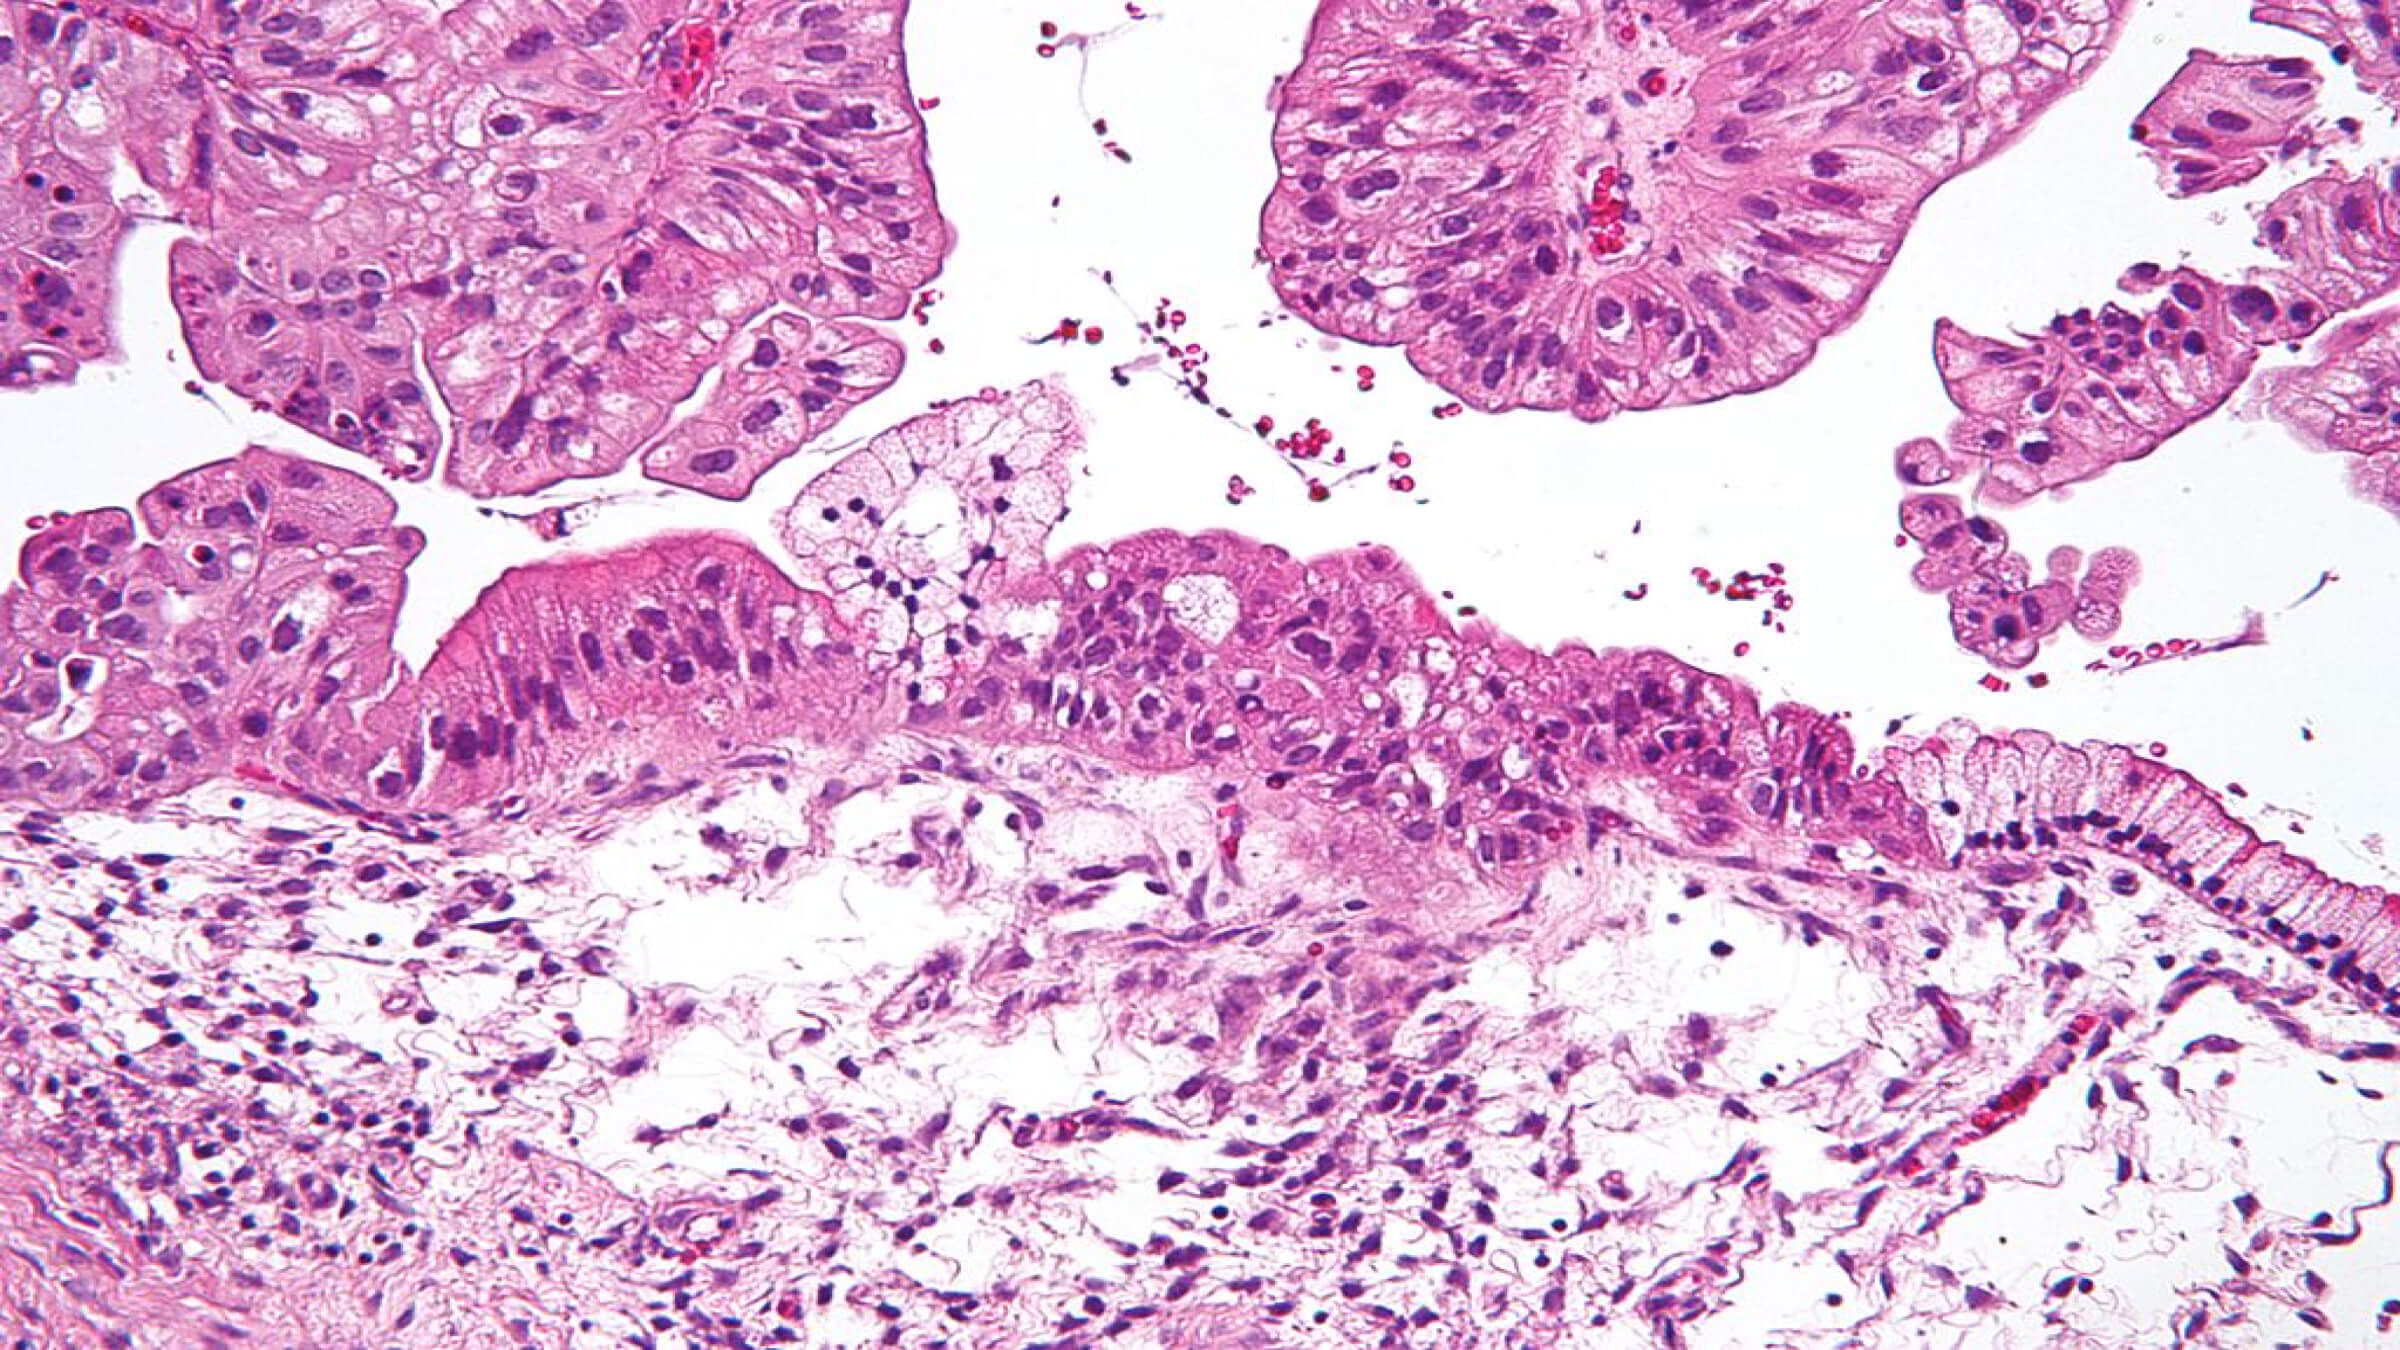 Magnified image of an ovarian tumor.